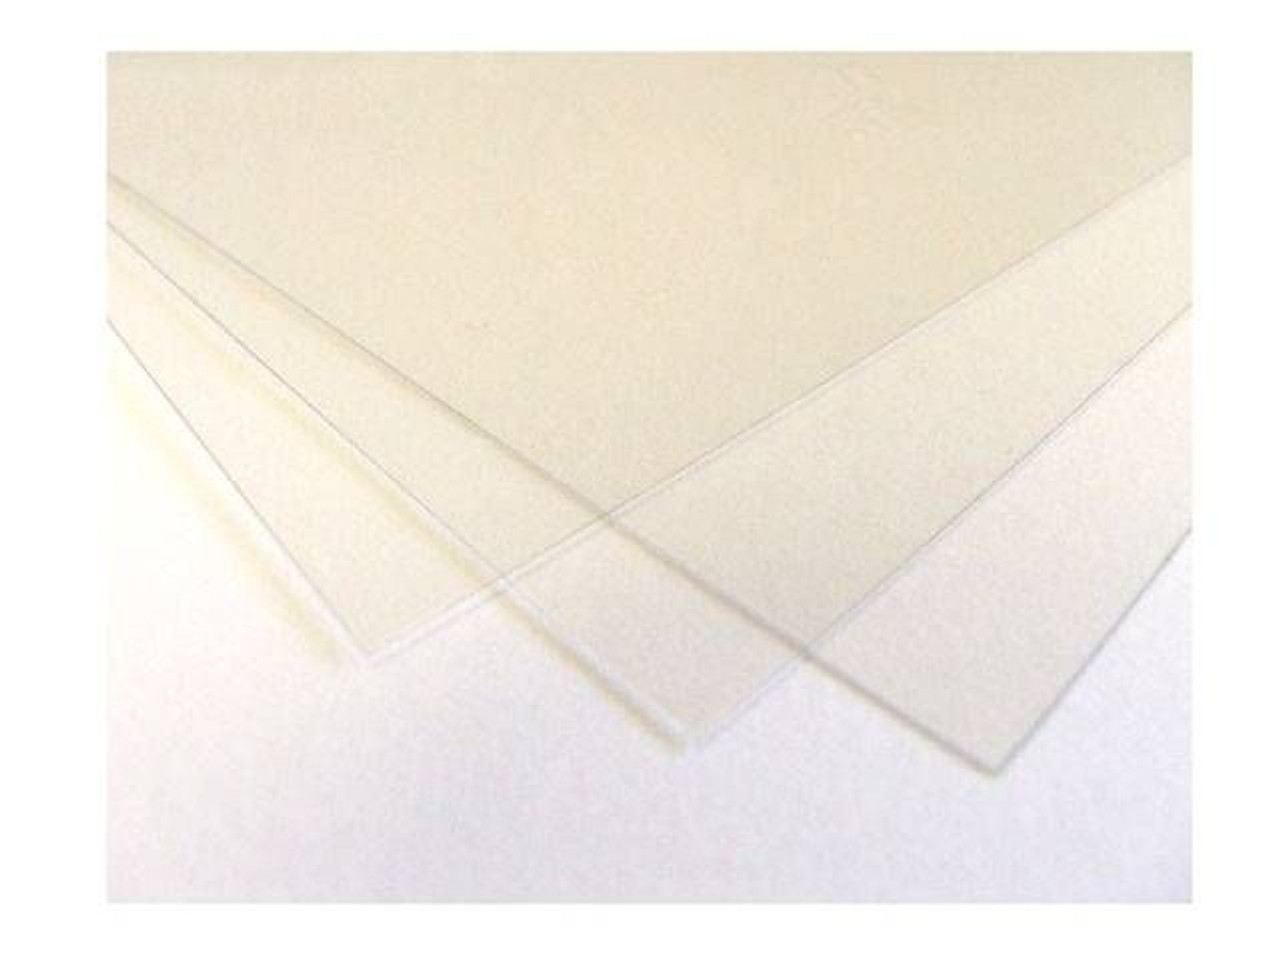 10-55pcs/lot Heat Resistant Perfectly Clear Acetate Sheets For